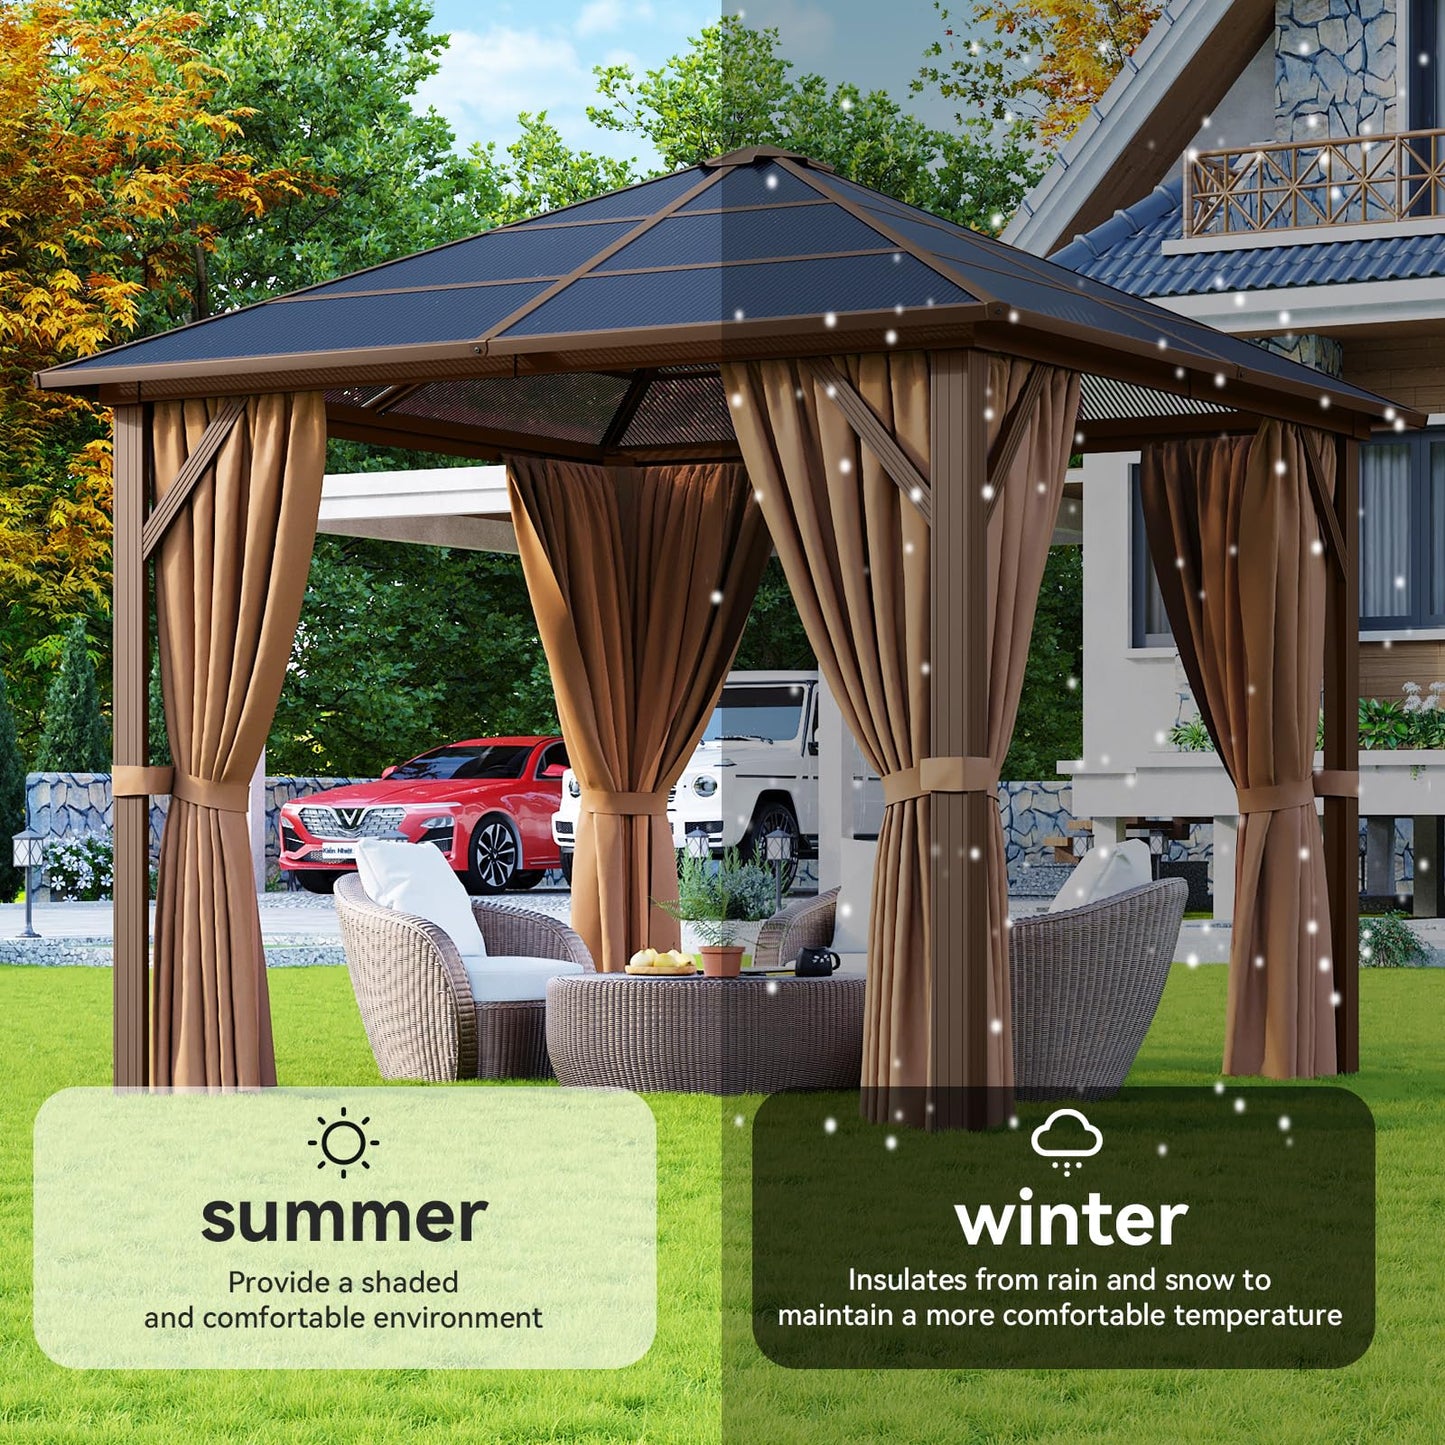 Aoxun 10' x 10' Gazebo Single Polycarbonate Top, Outdoor Polycarbonate Frame Permanent Pergolas with Curtains and Netting, for Patios, Parties, Backyards, Gardens and Lawns